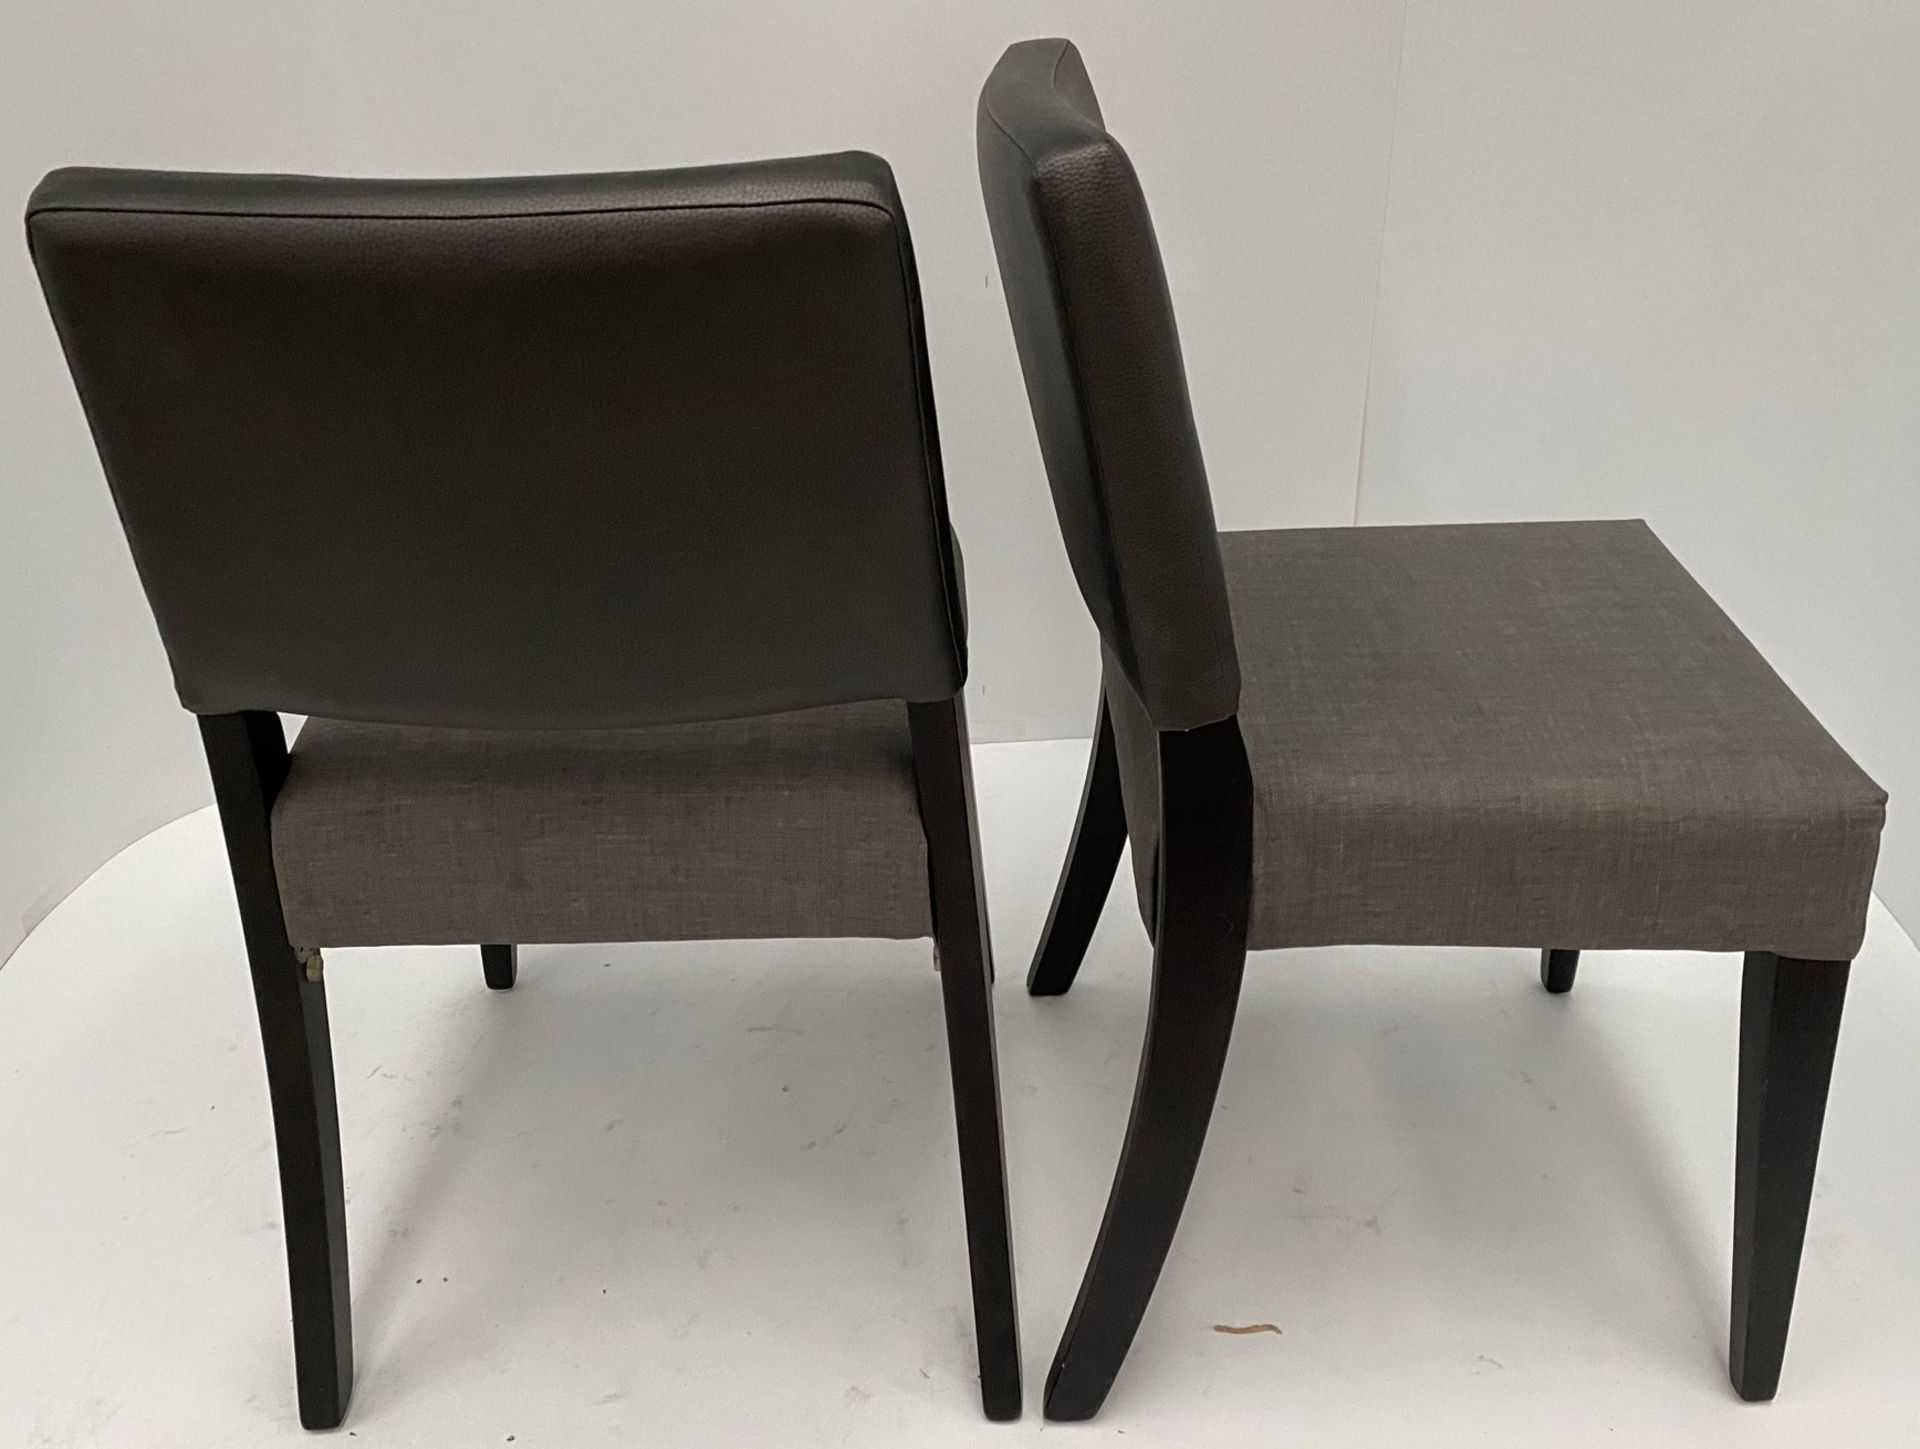 2 x Reuben fully upholstered side/dining chairs. - Image 2 of 3